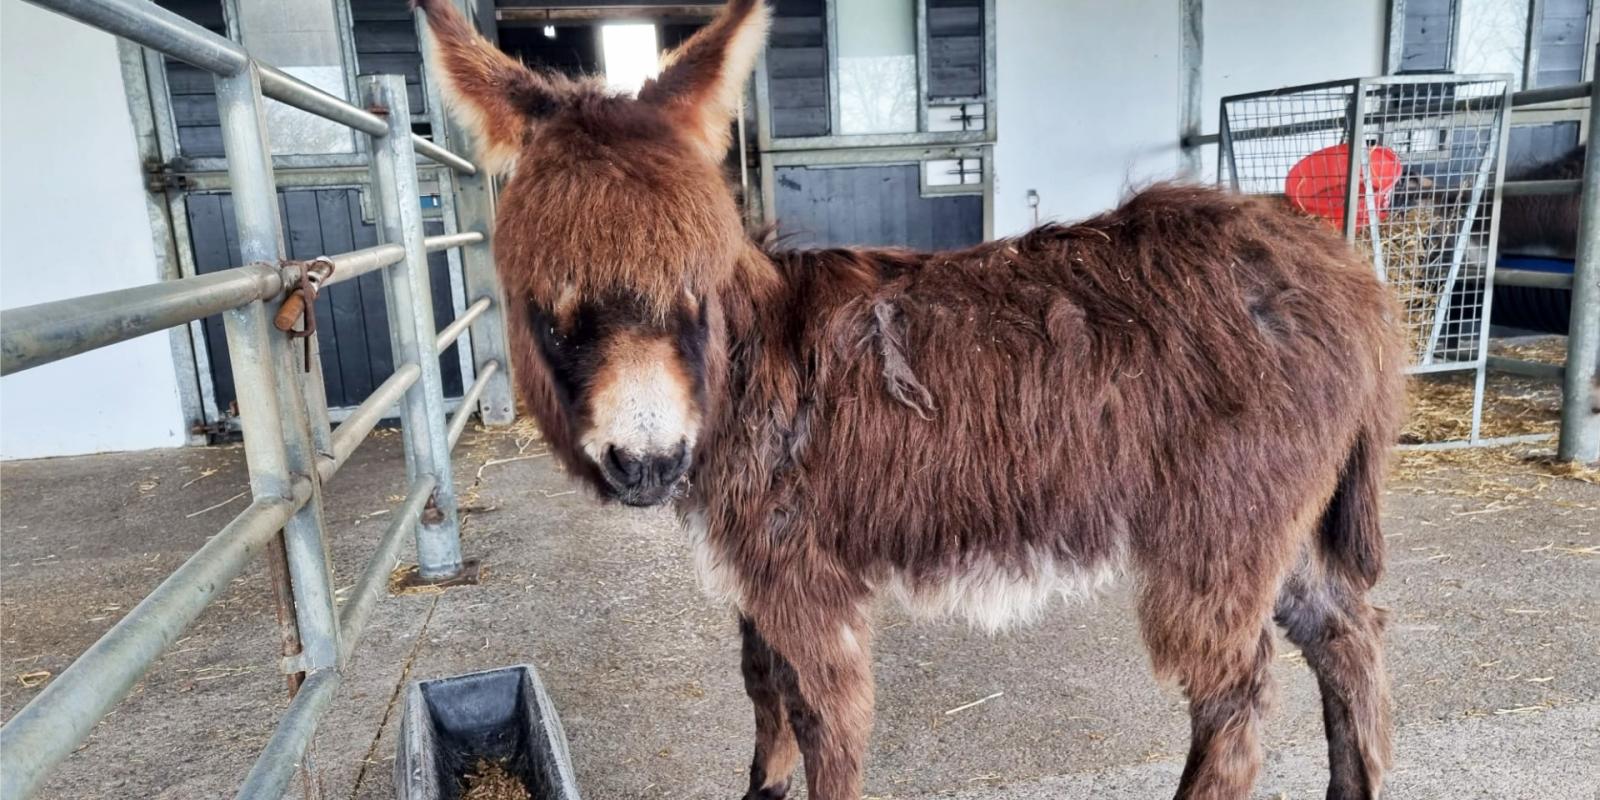 Rescued foal at our New Arrivals unit